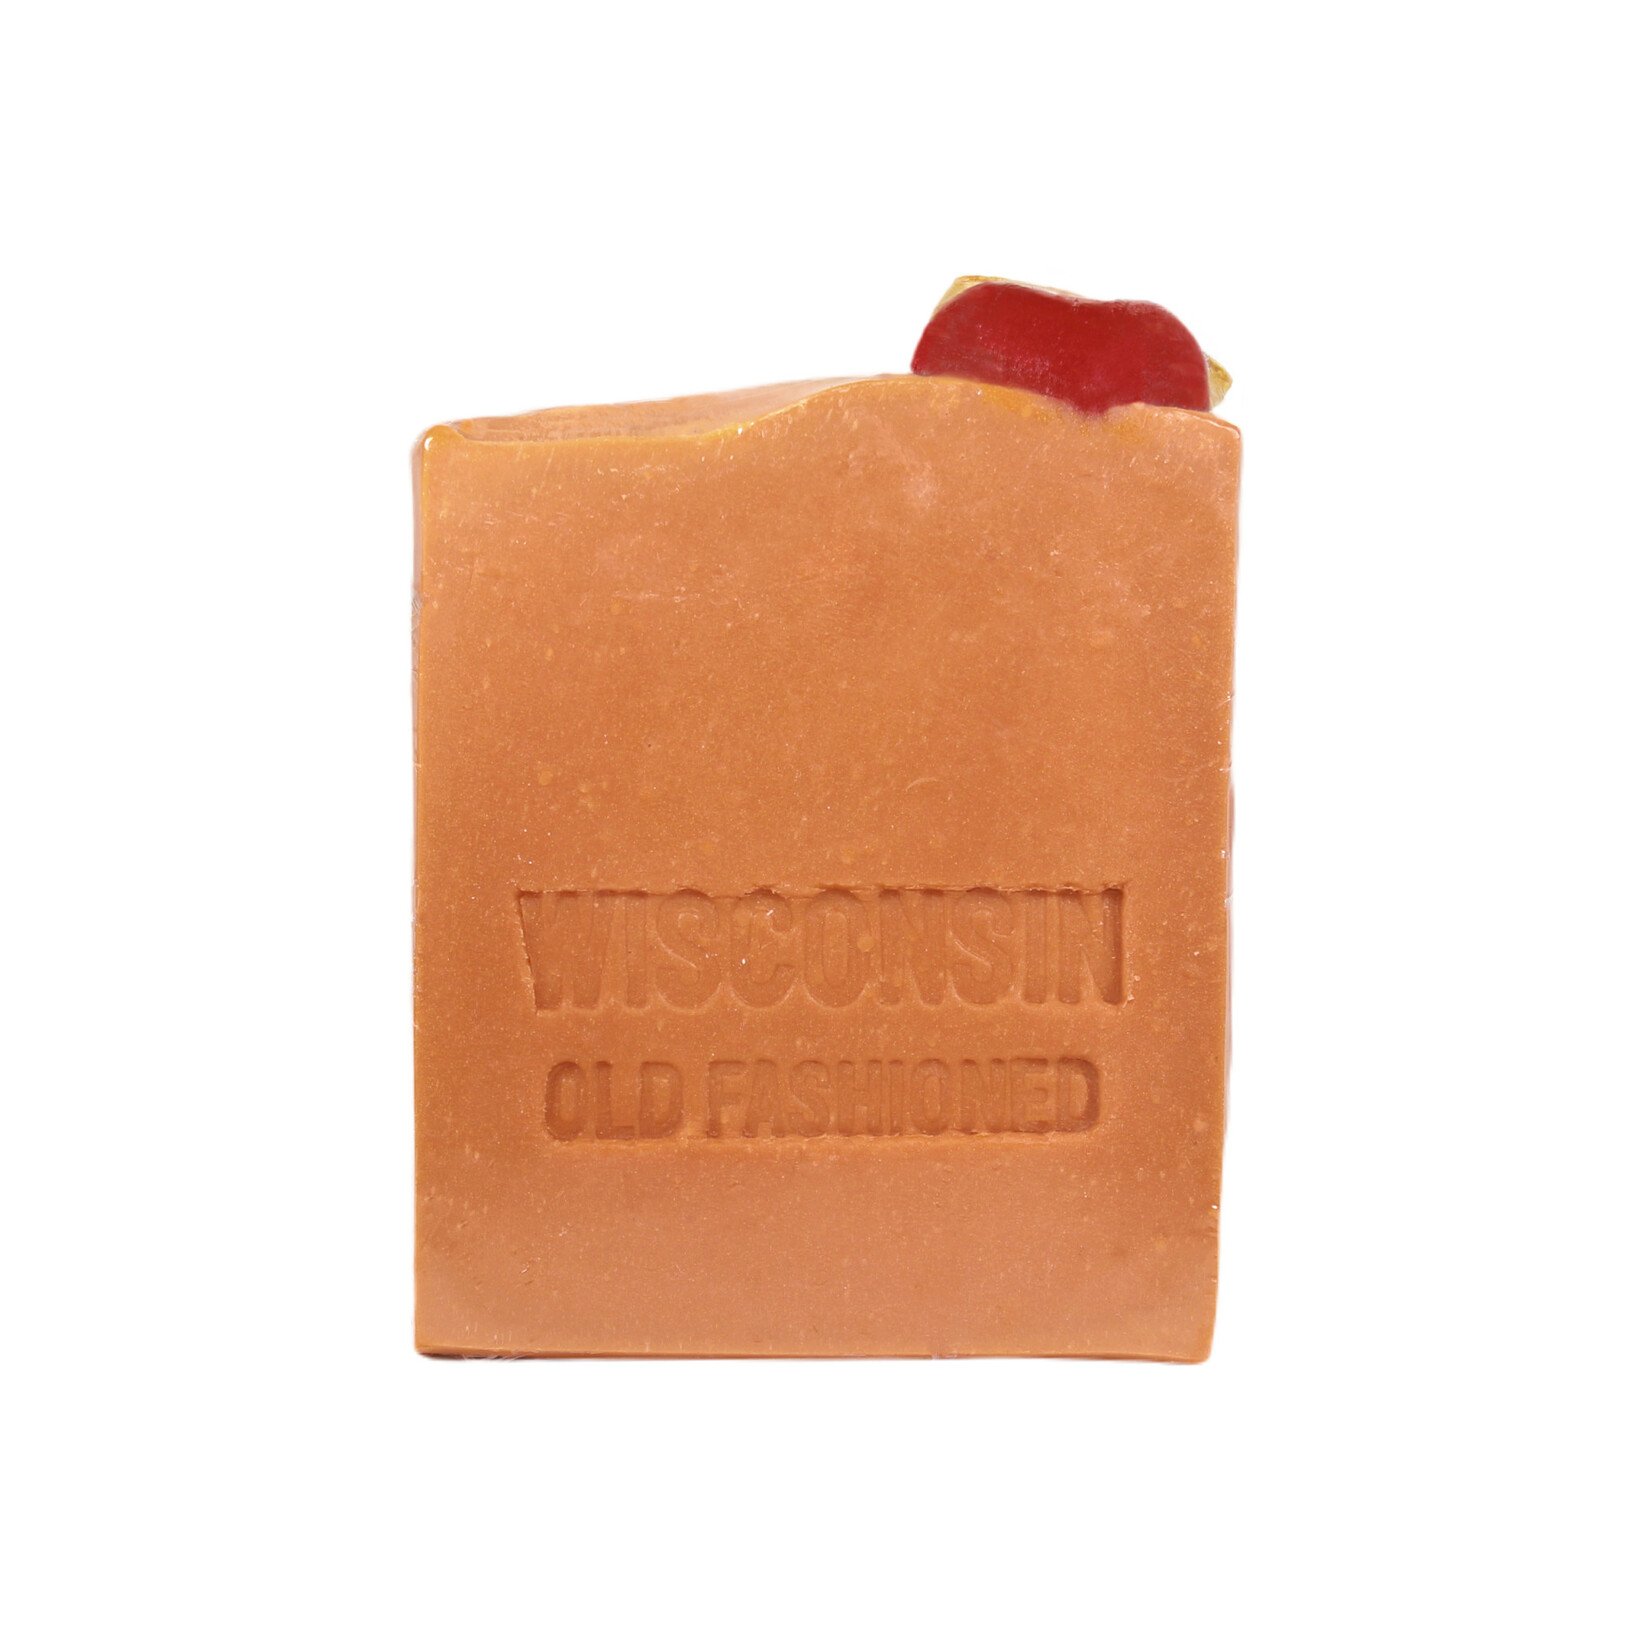 Wisconsin Old Fashioned Soap